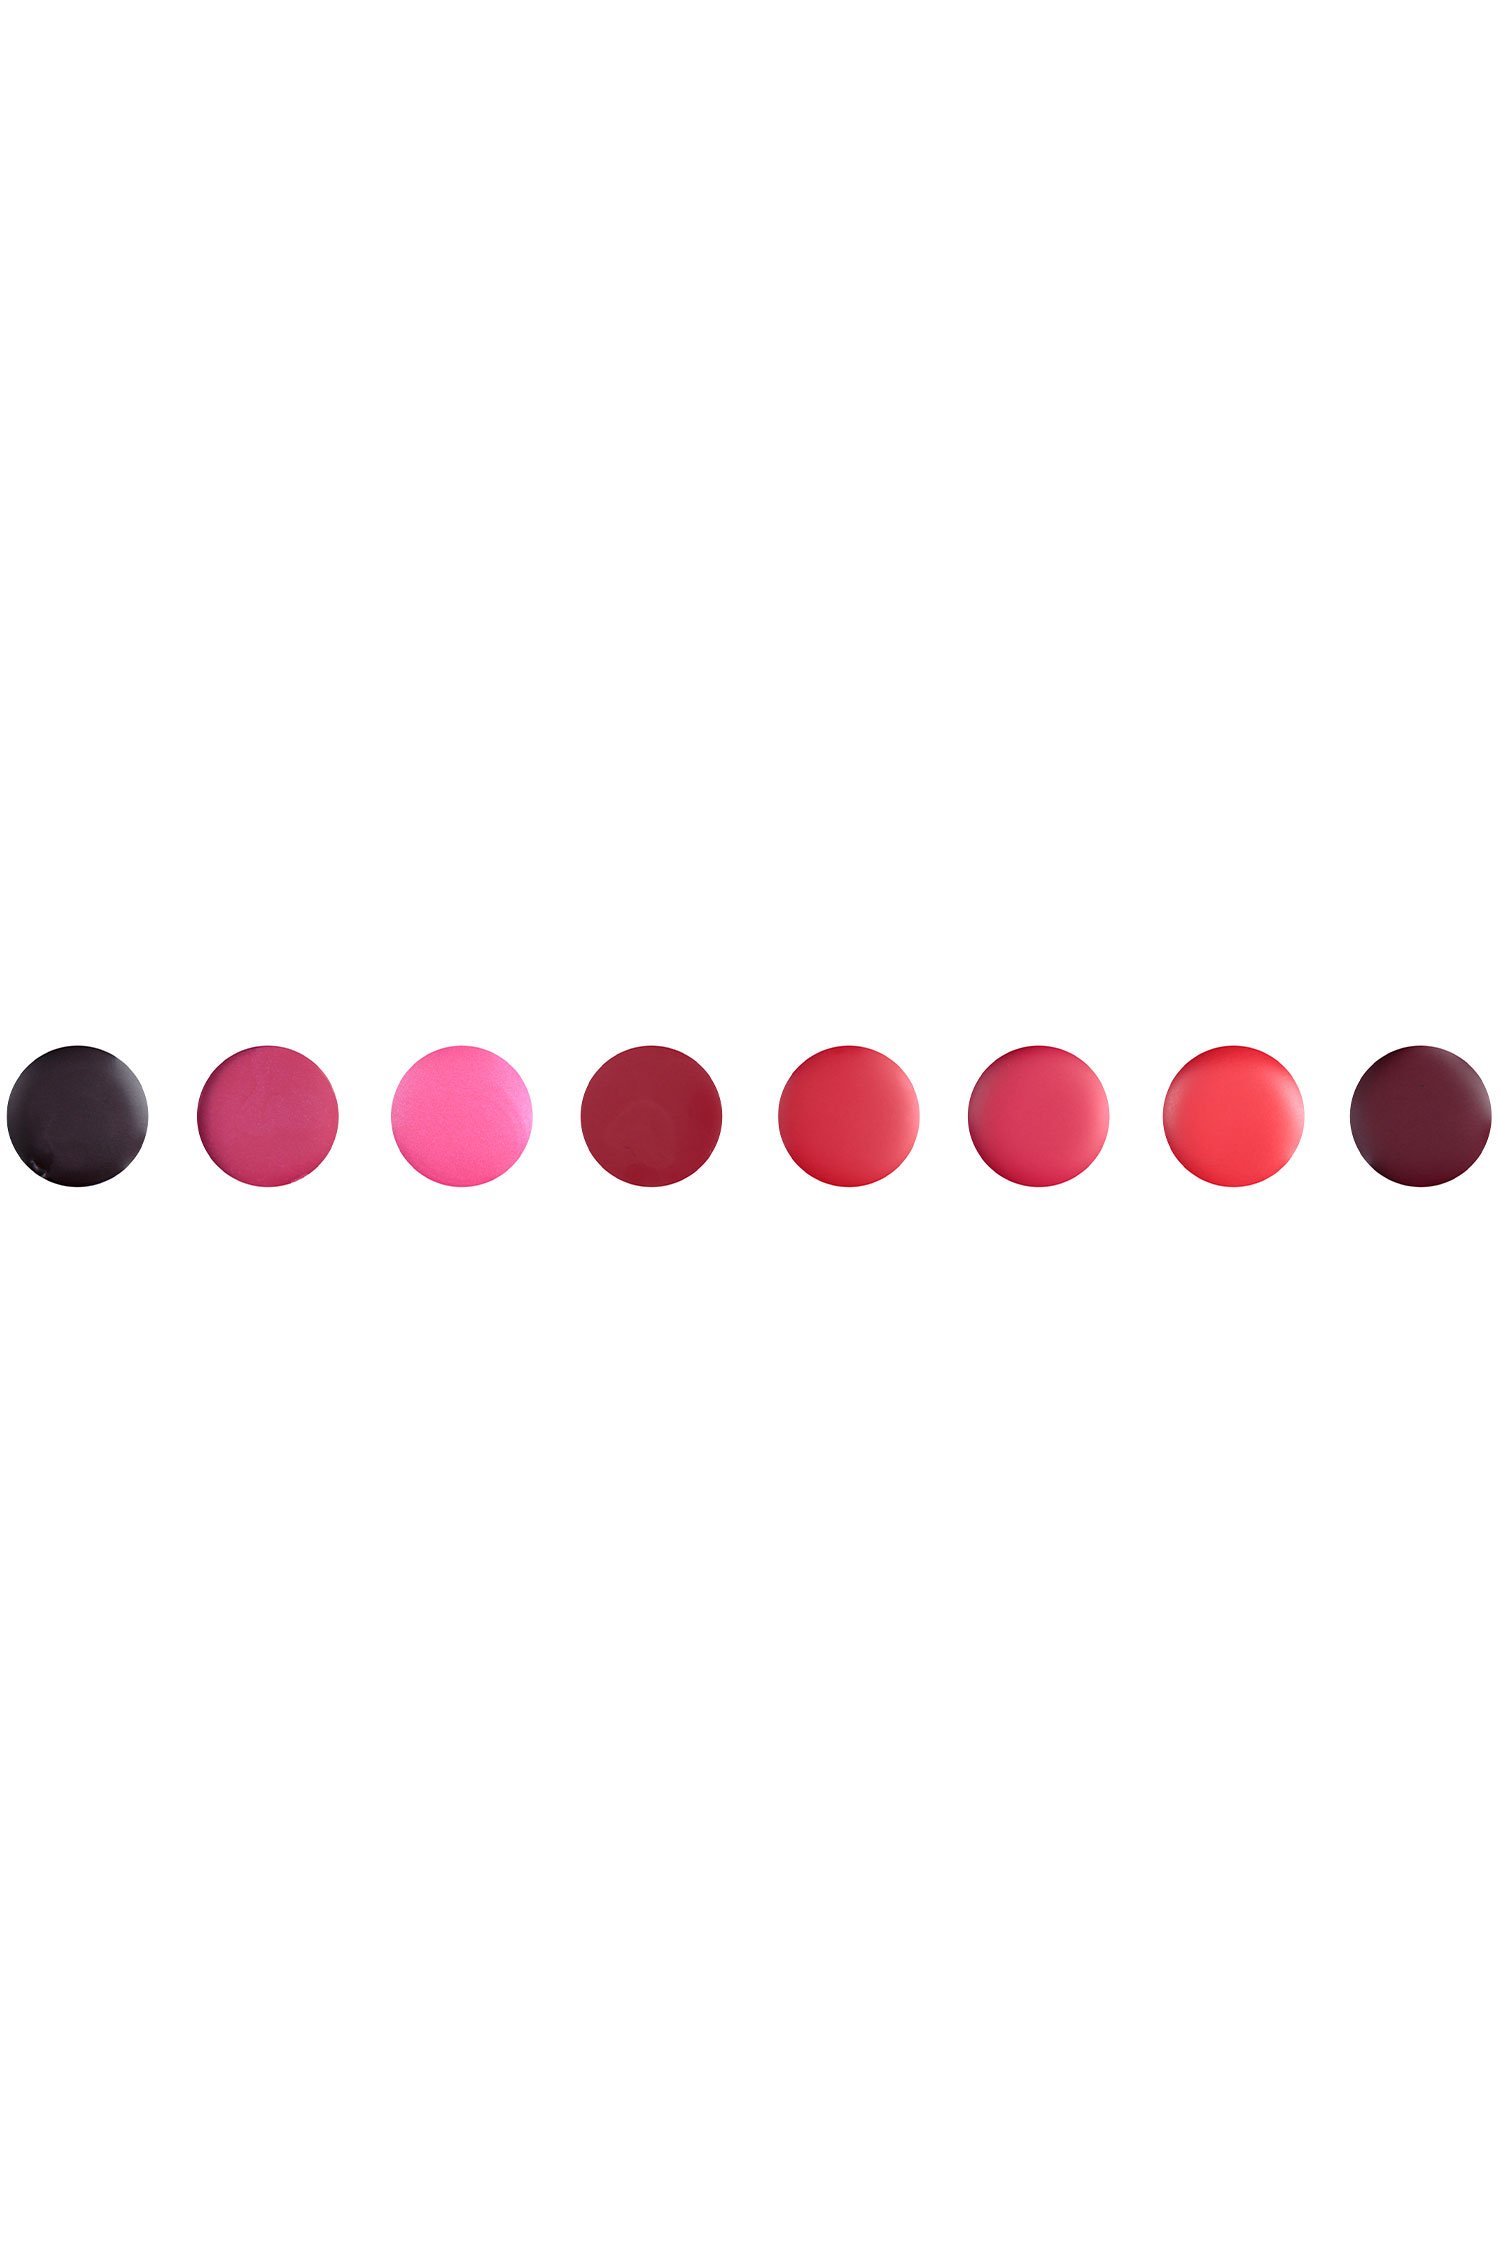 Plum Deep & Pink, Neon Pink, Magenta Red, Royal Red, Bright Red, Classic Red, Cherry Red dots.